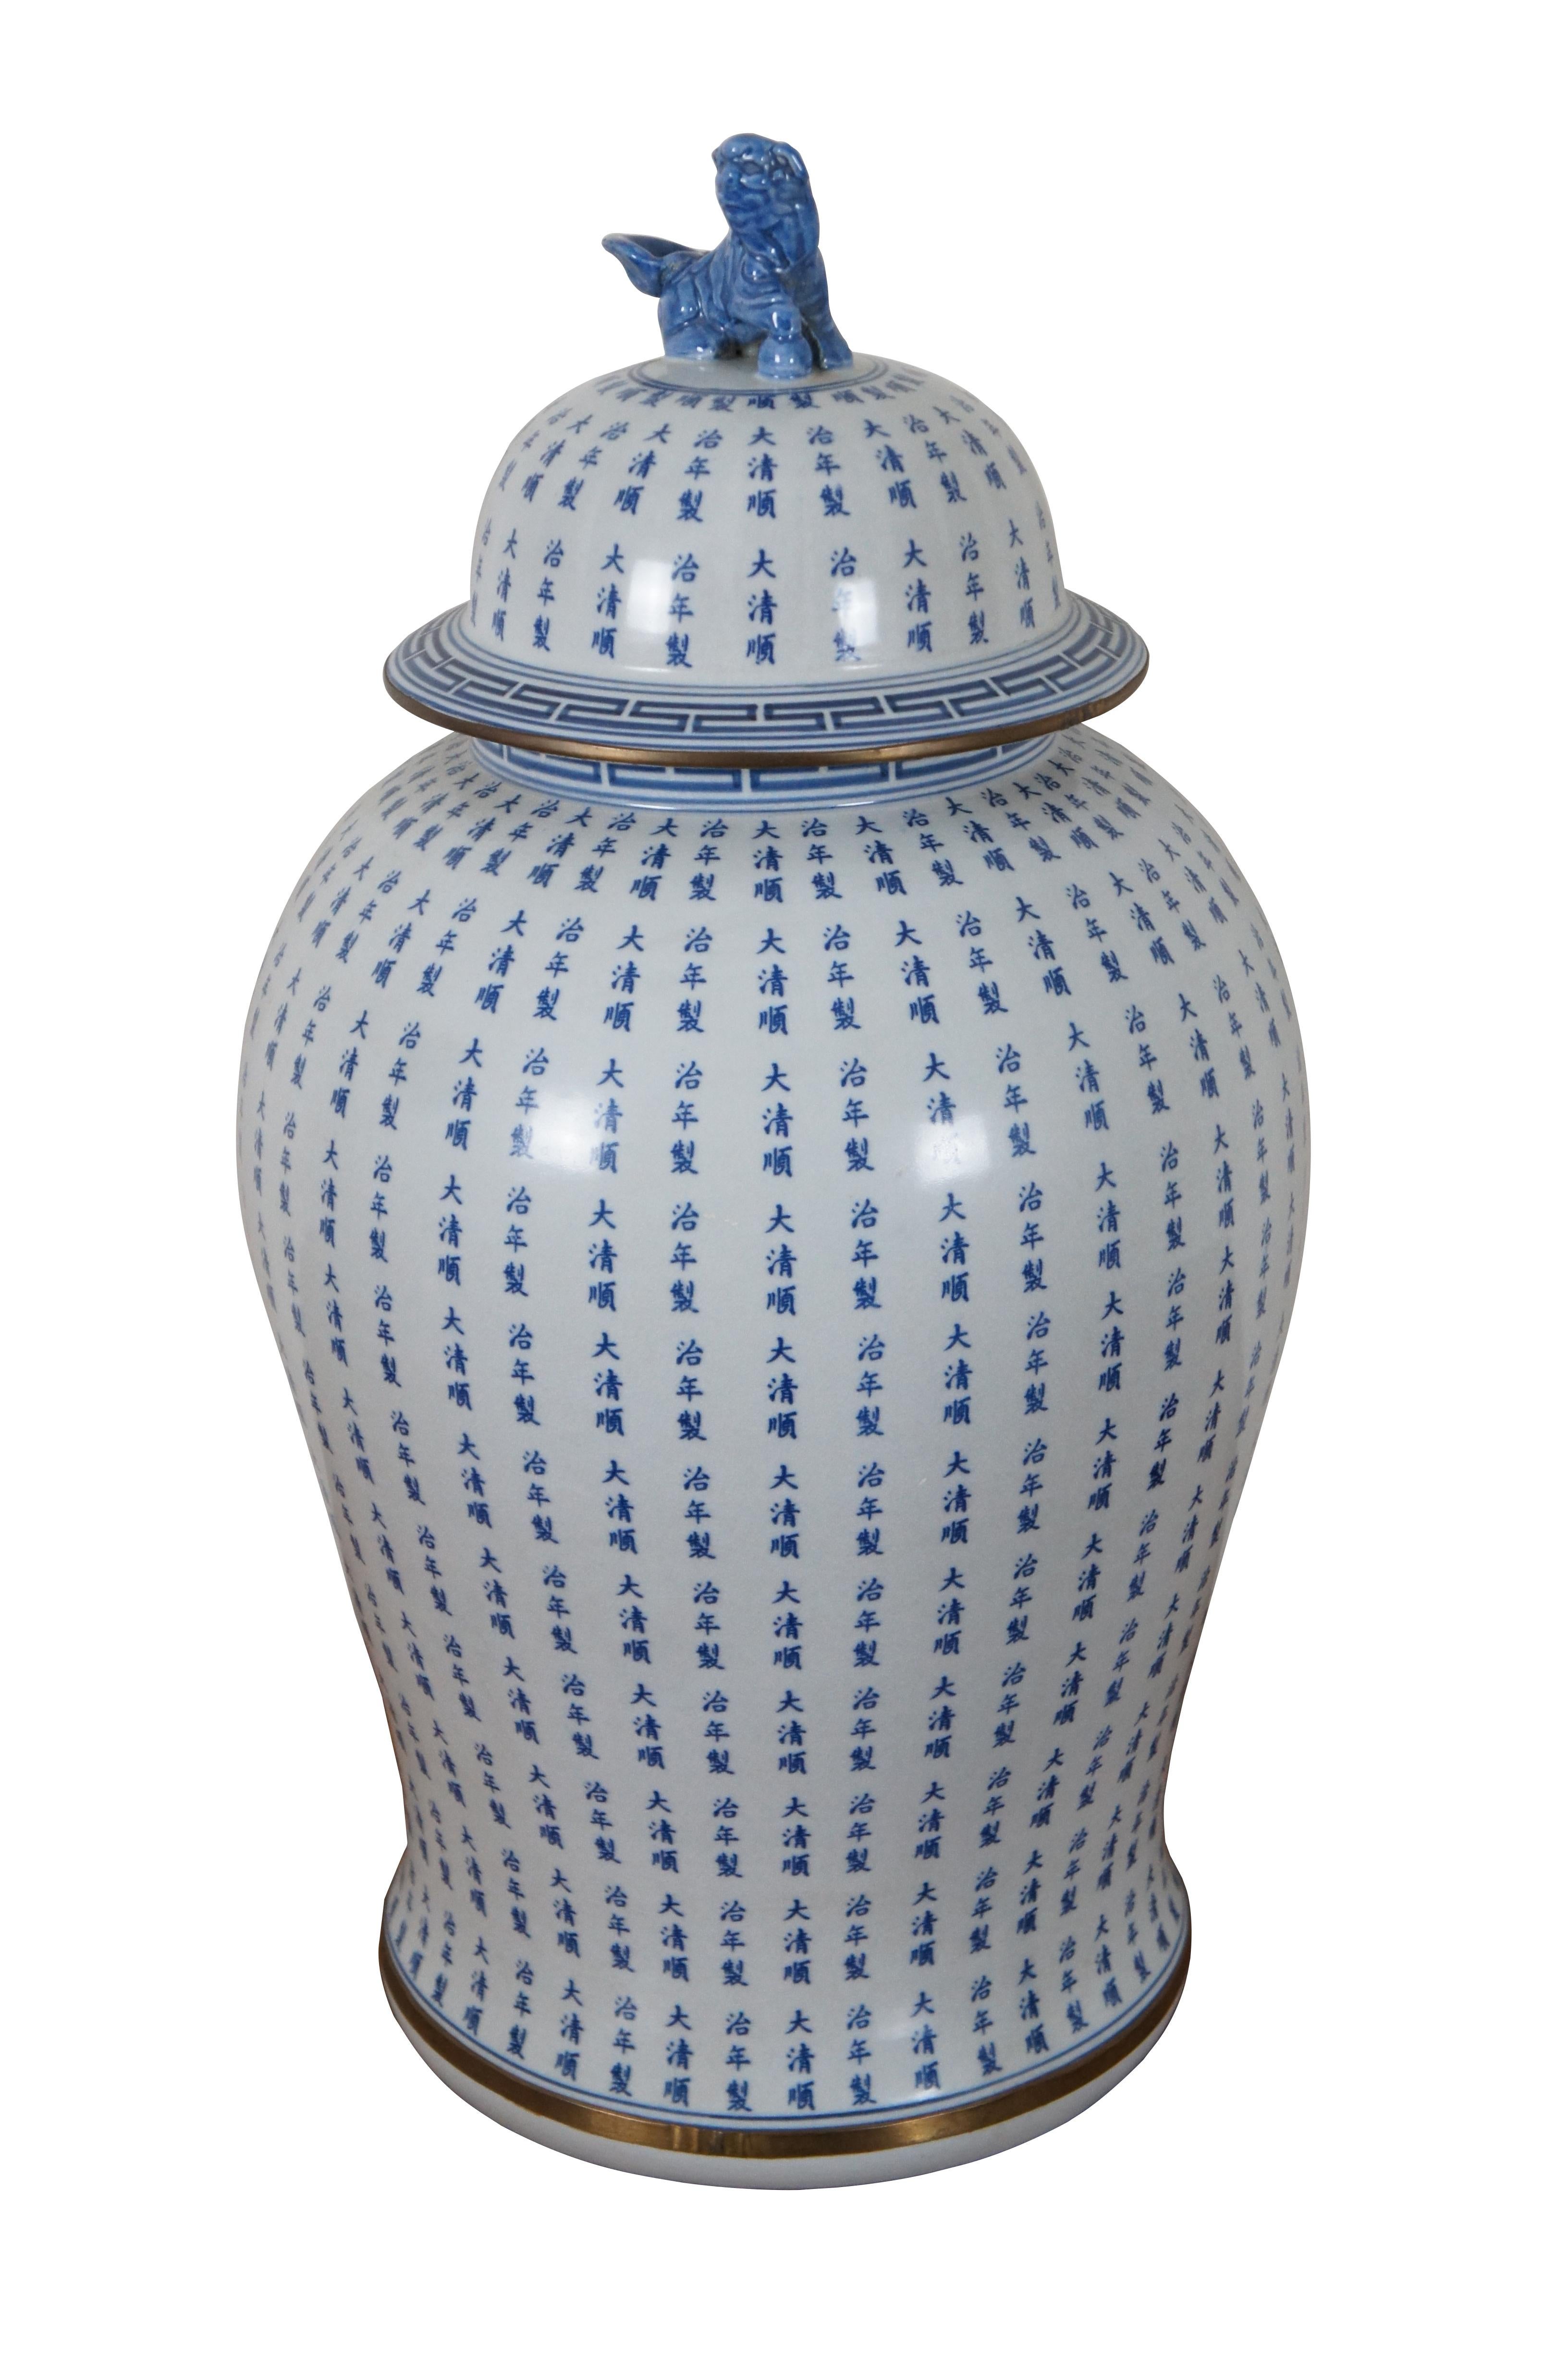 An impressive 20th century blue and white porcelain Chinese export Qing dynansty marked ginger jar. Features a body covered in calligraphy with gold accents and figural foo dog or lion finial lid.